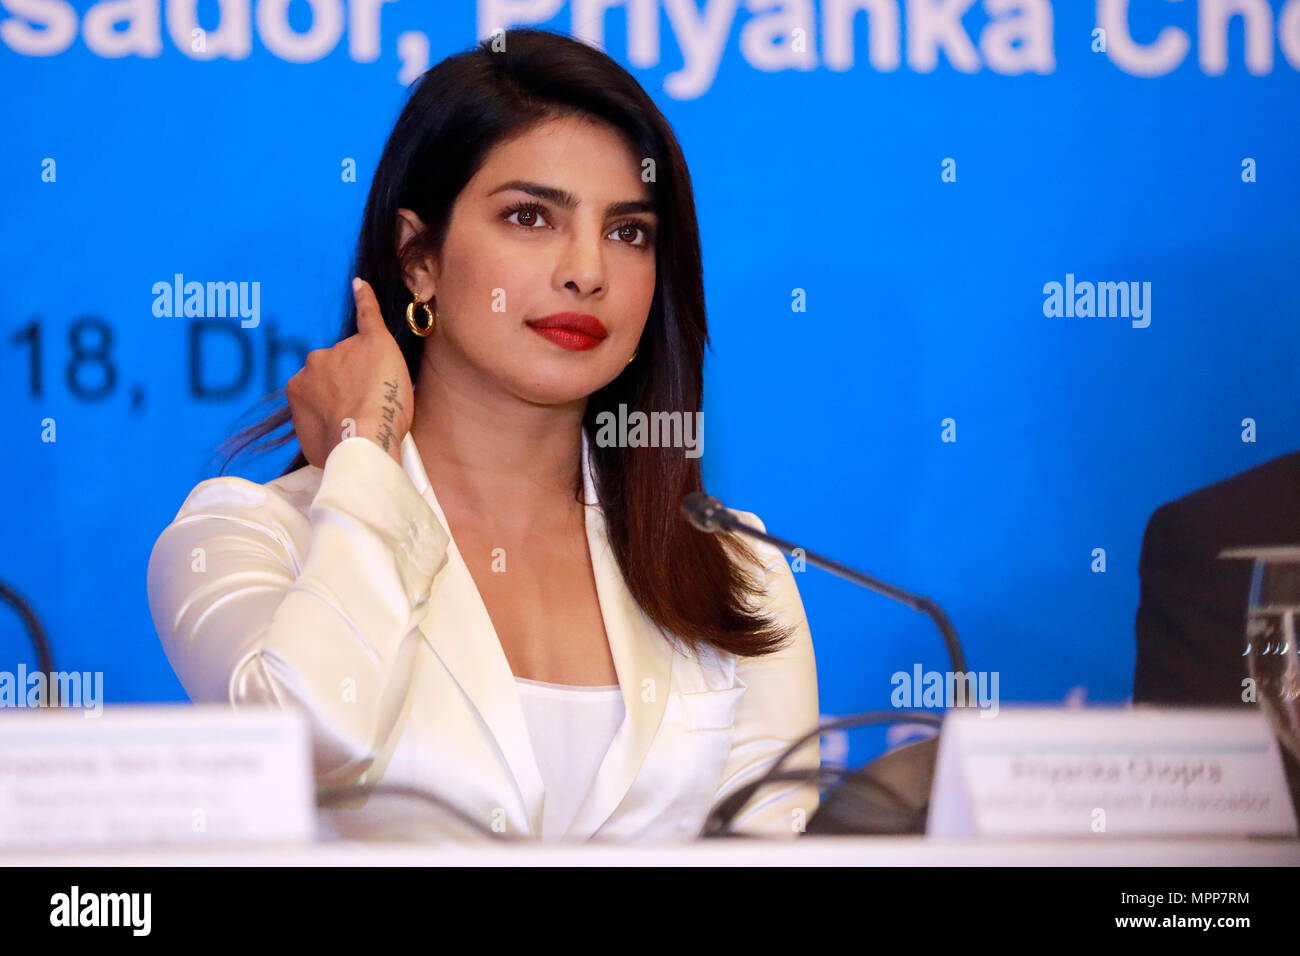 Dhaka, Bangladesh - May 24, 2018: Unicef Goodwill Ambassador and Bollywood actress Priyanka Chopra addresses a press conference in a city hotel after concluding her four-day visit in many Rohingya refugee camps at Cox's Bazar in Bangladesh. Stock Photo